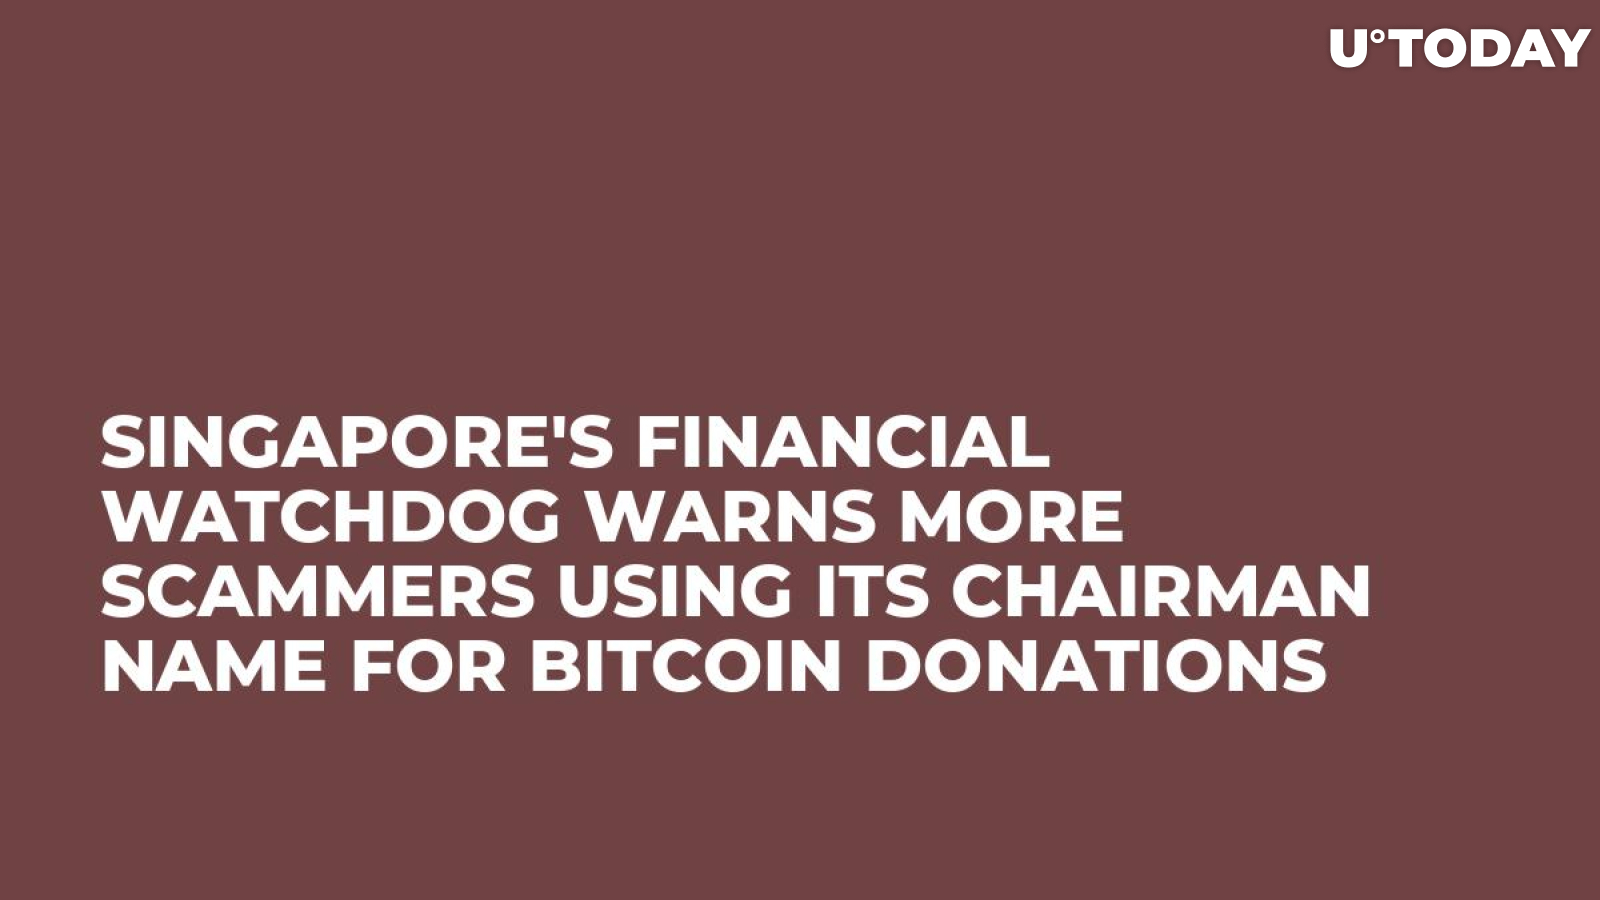 Singapore's Financial Watchdog Warns More Scammers Using Its Chairman Name For Bitcoin Donations 